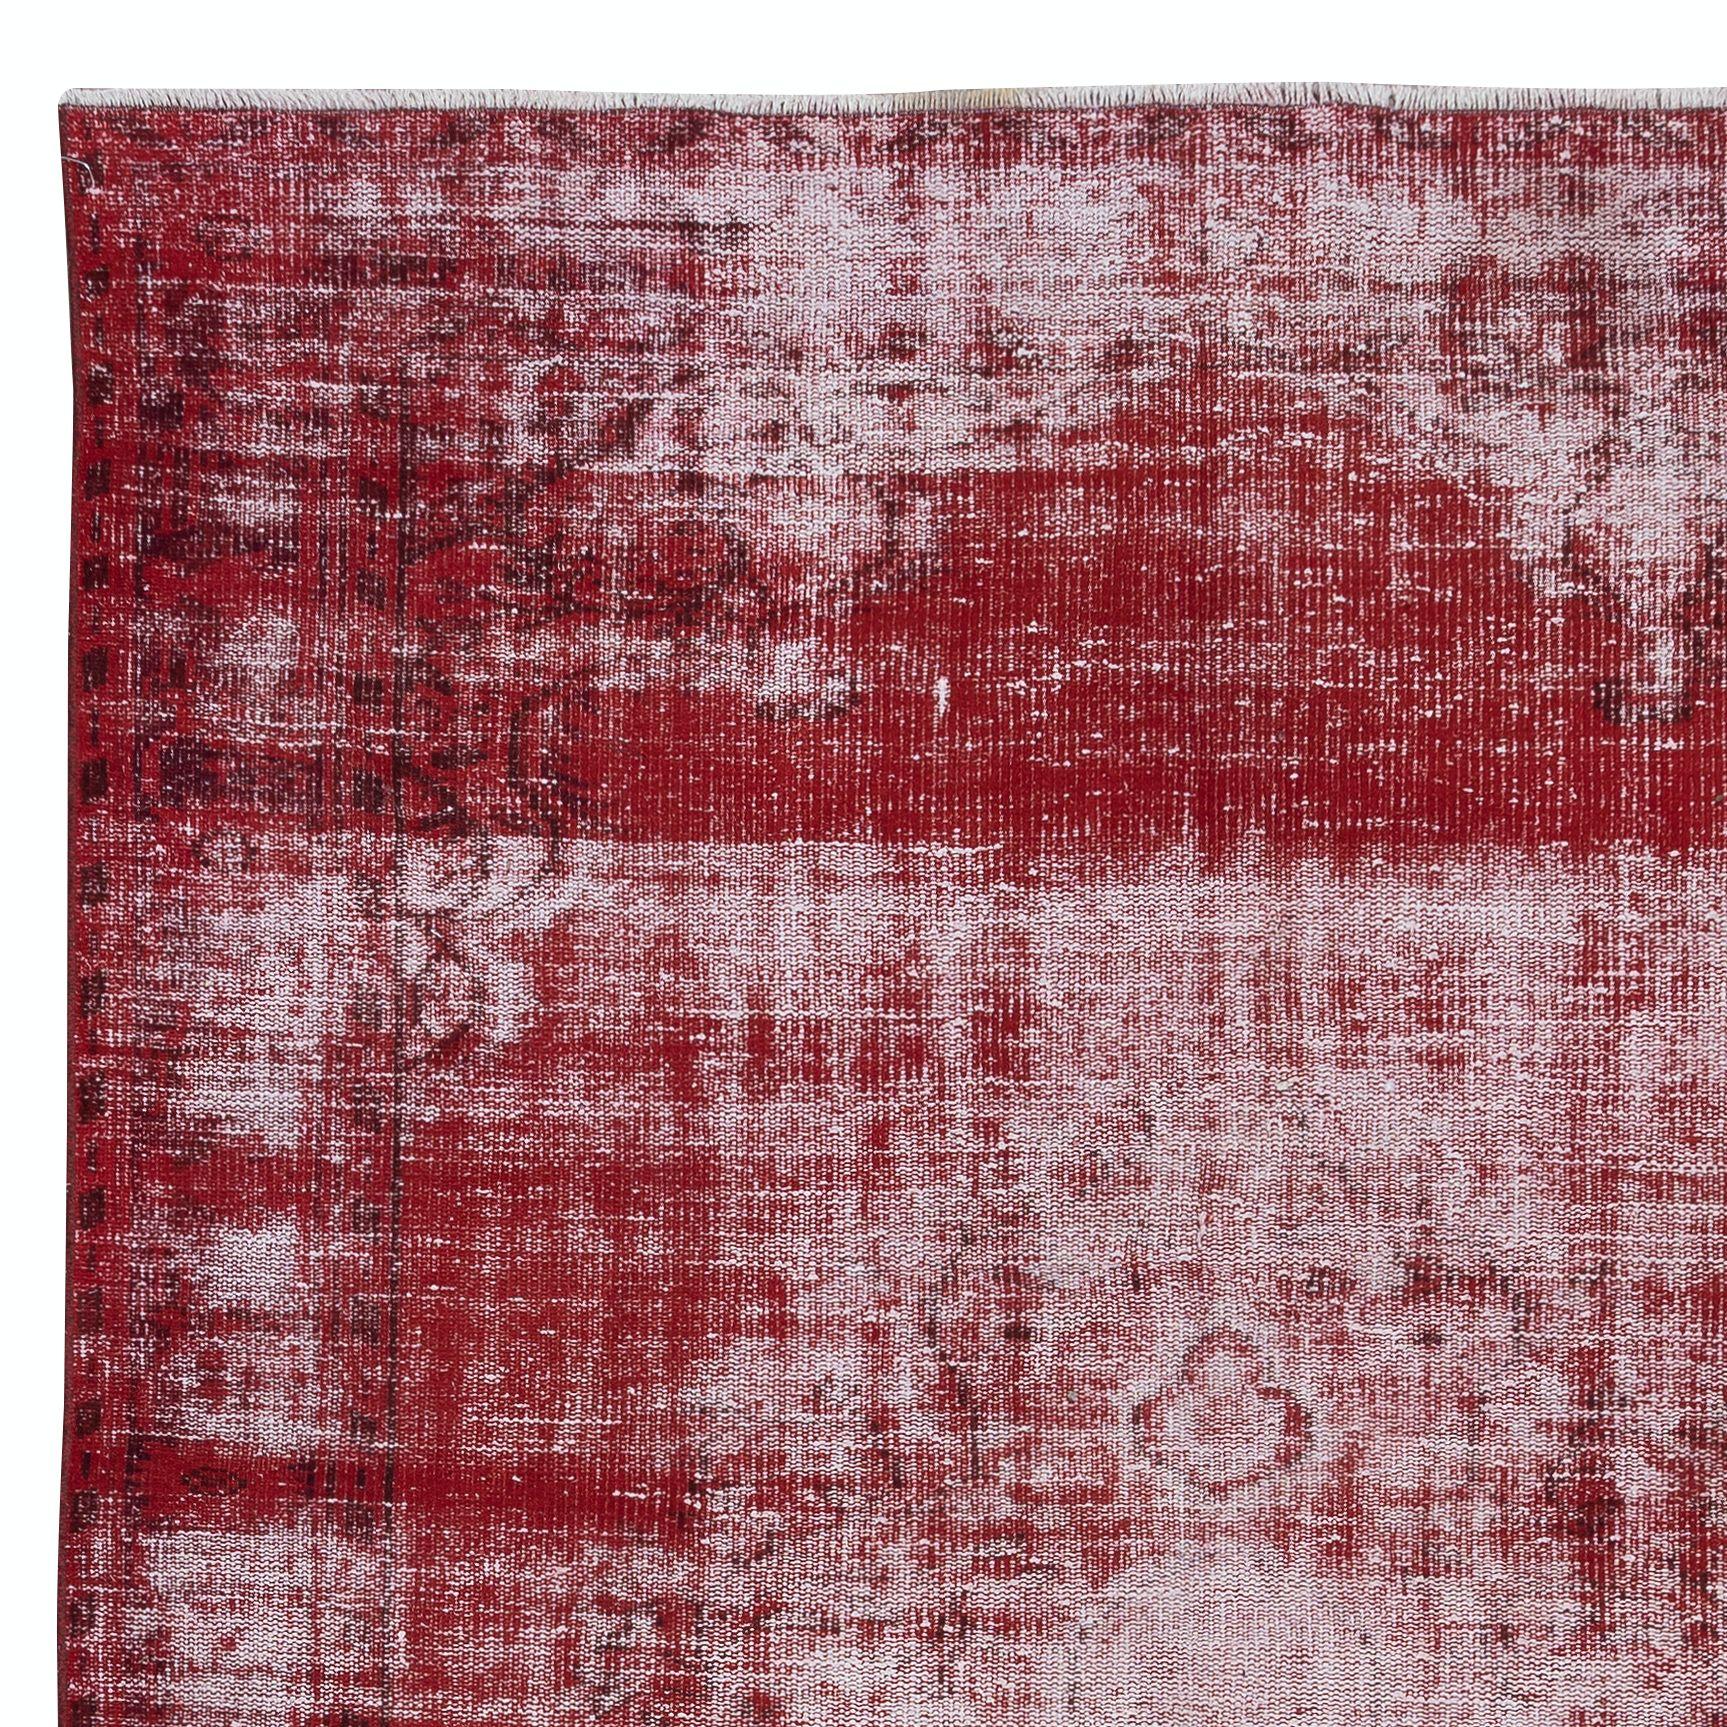 Hand-Knotted 6x10 Ft Shabby Chic Turkish Red Area Rug, Vintage Handmade Distressed Carpet For Sale